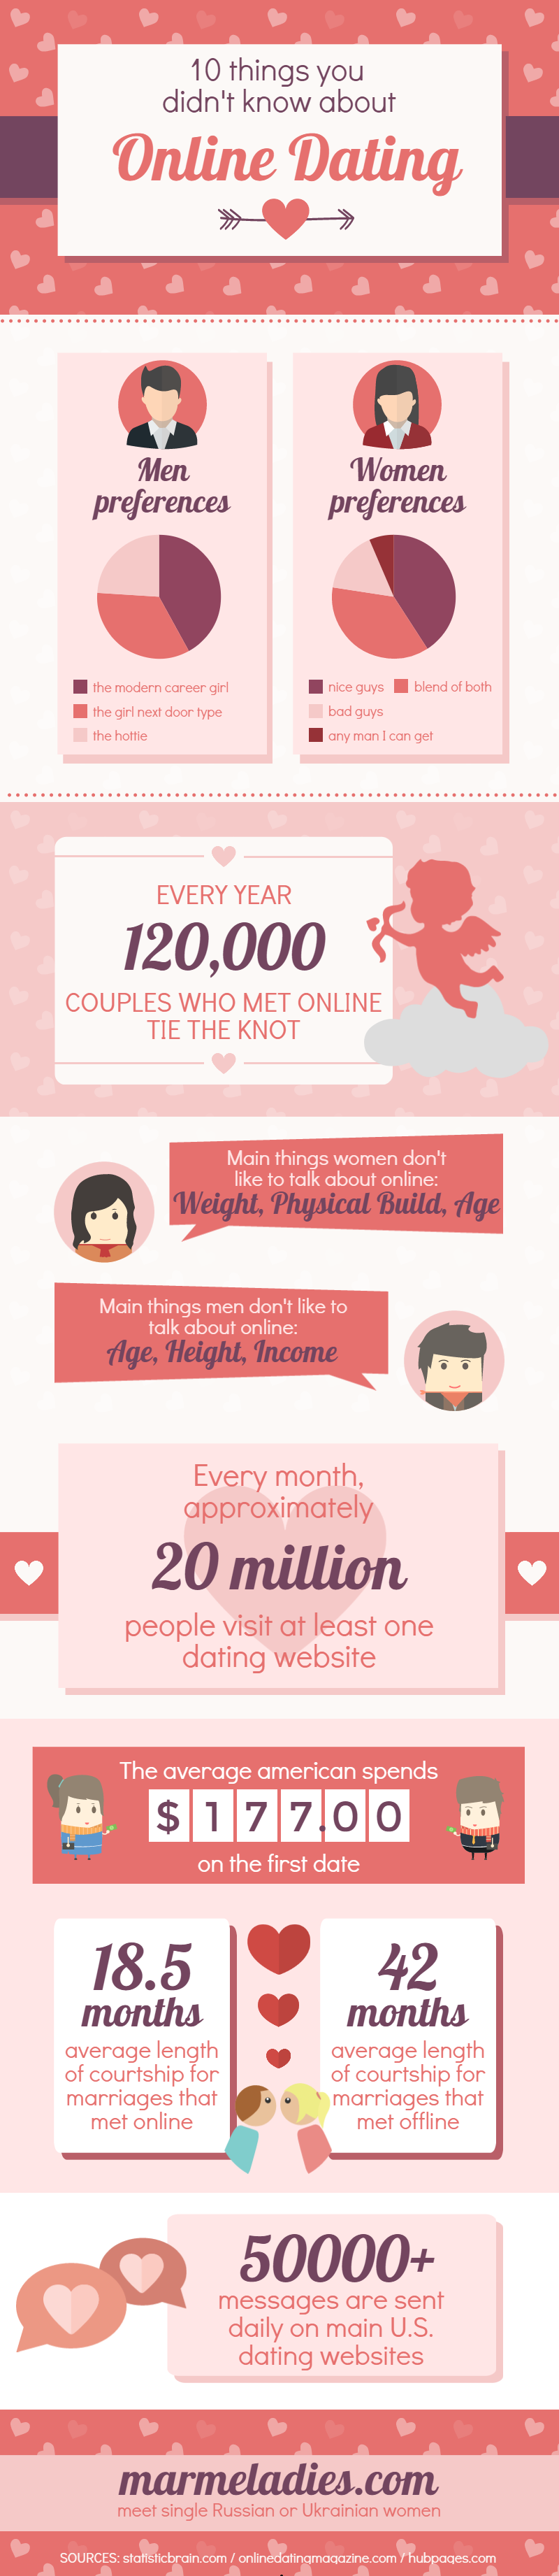 10 Things You didn't know about Online Dating